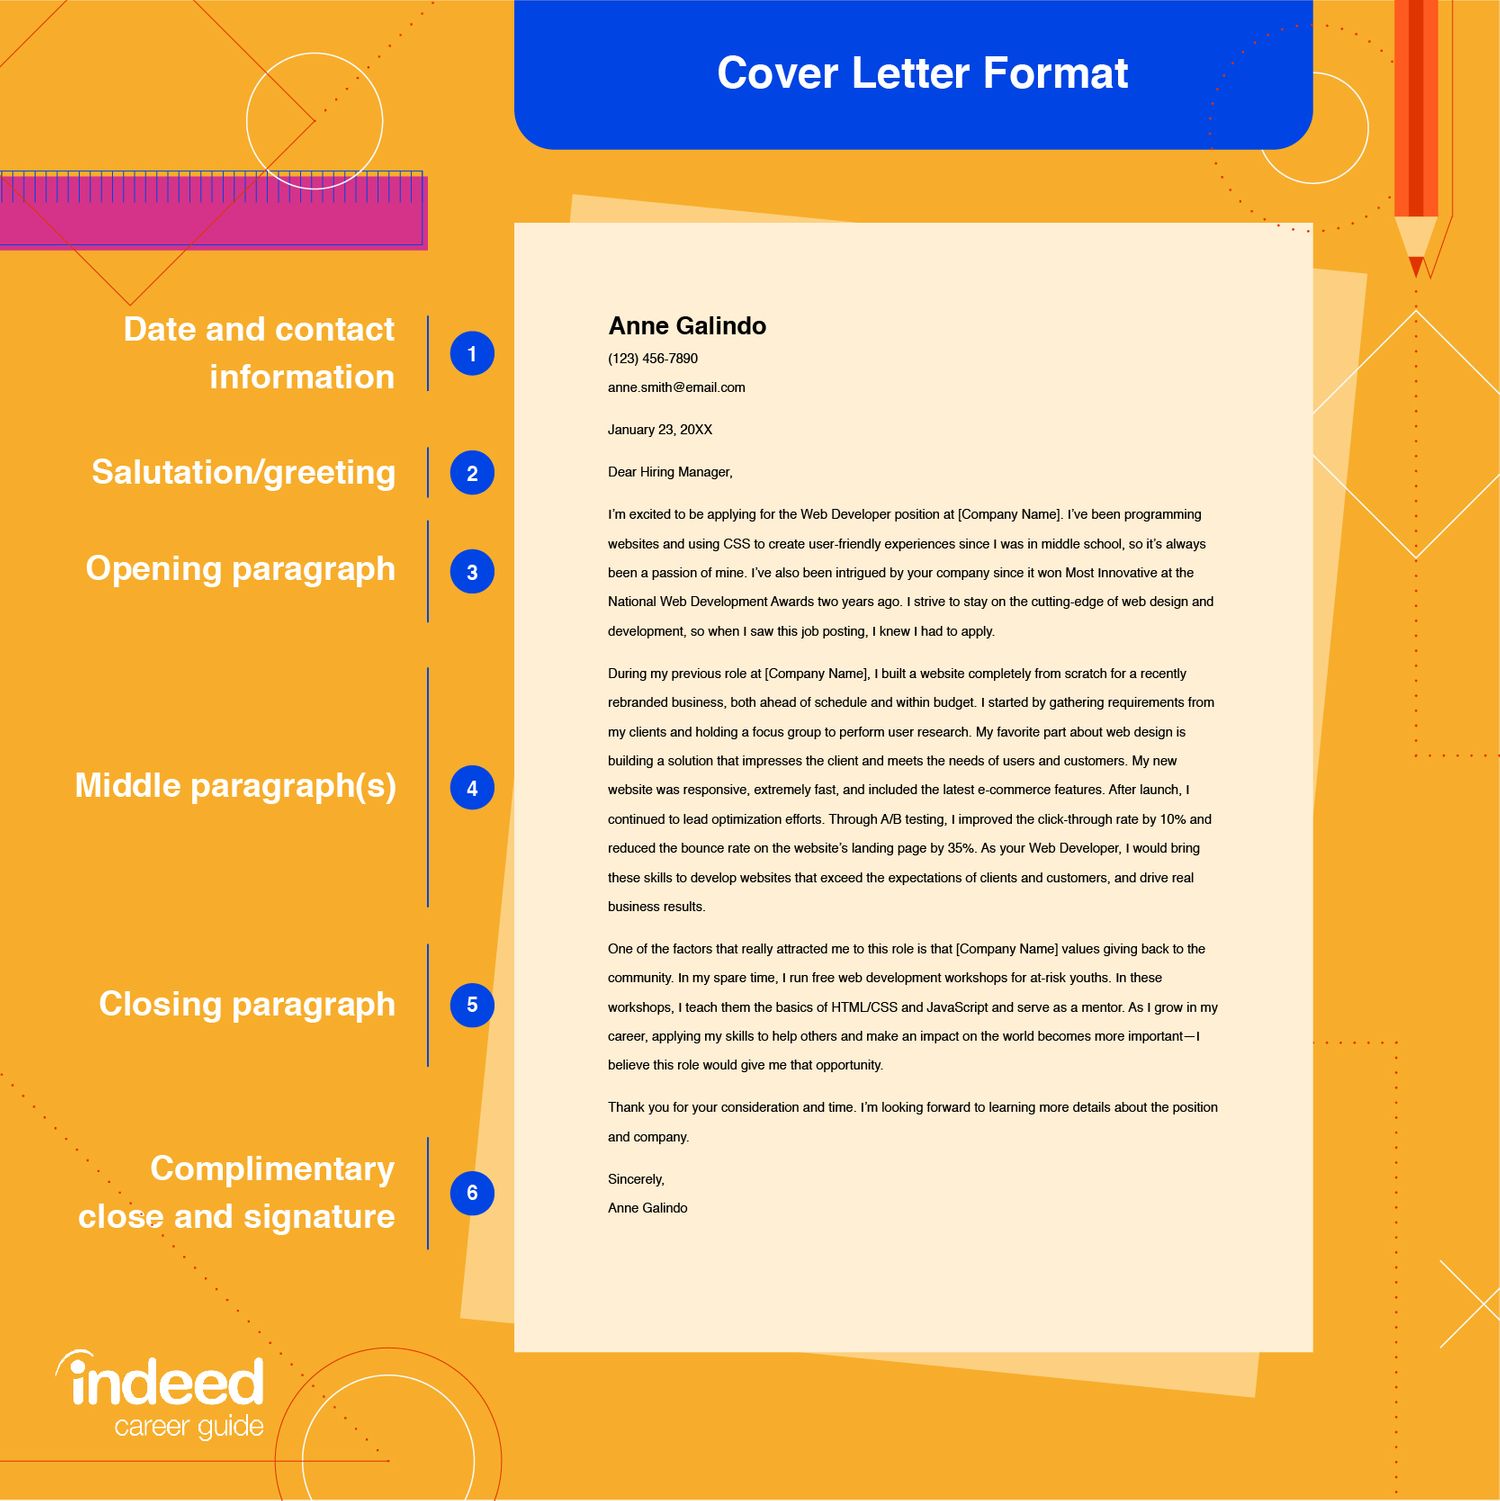 How To End A Cover Letter For A Job Application